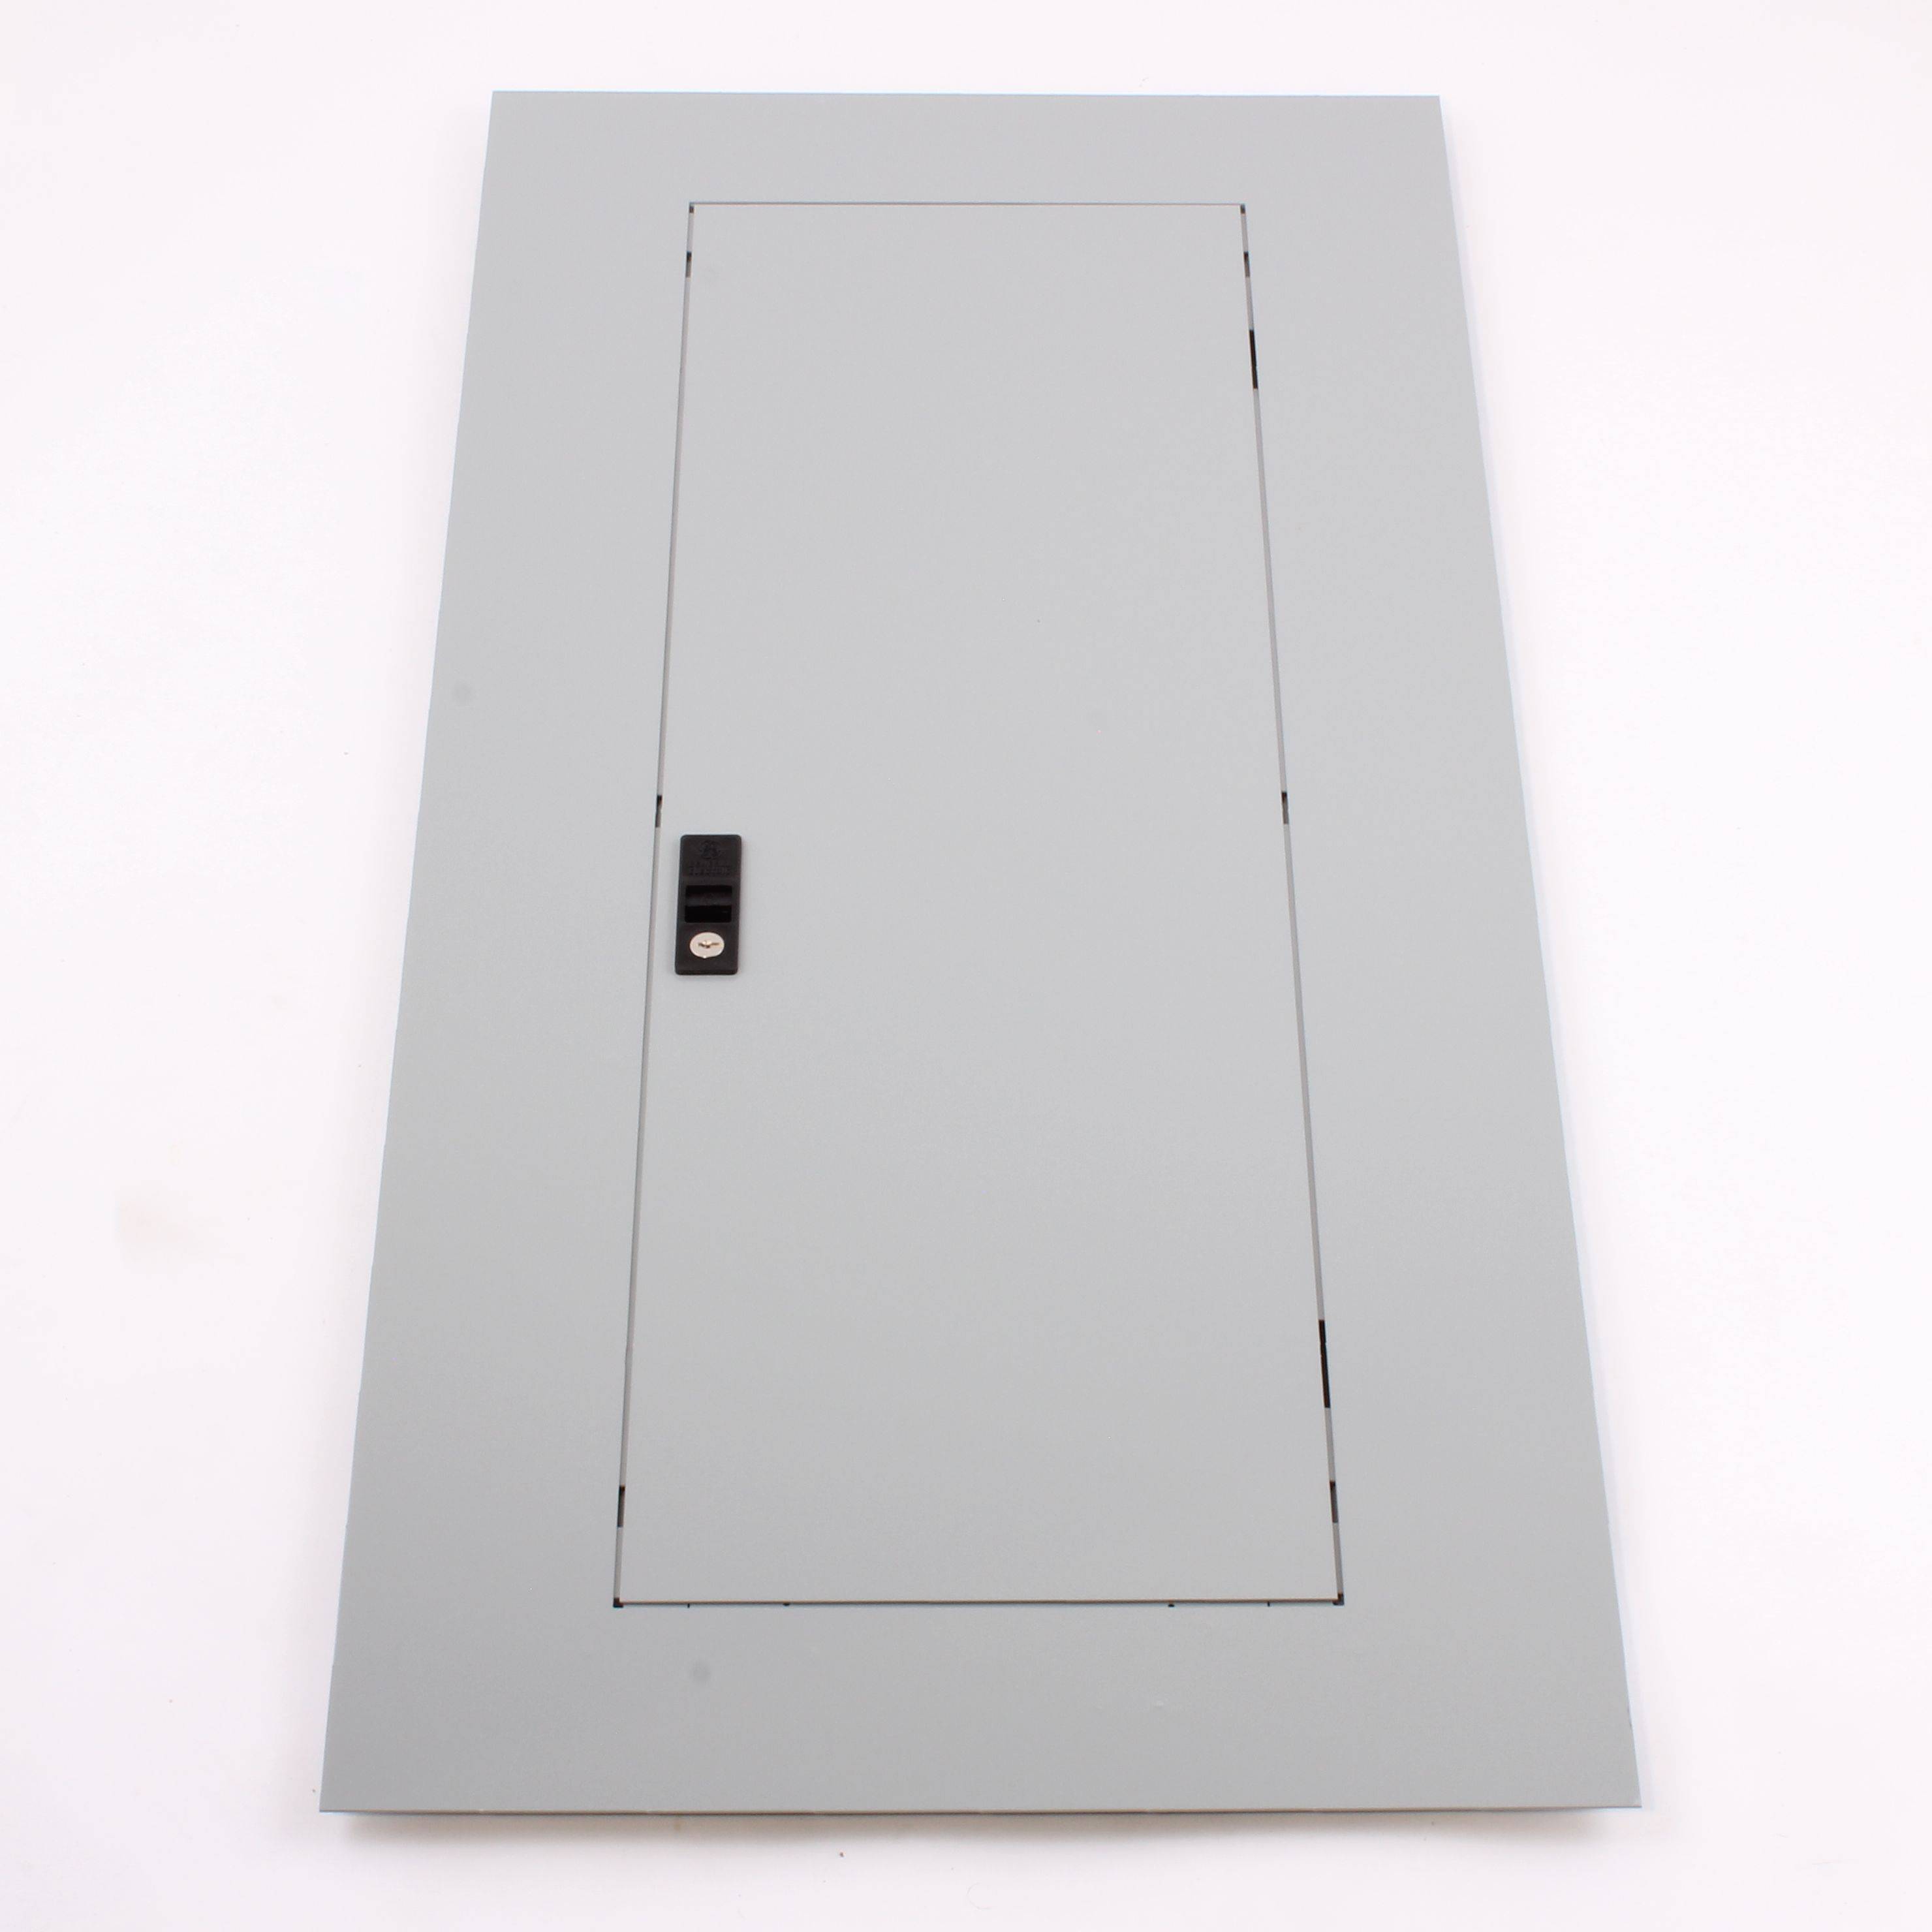 GE AF43F A-Series™ II Standard Panelboard Front Trim, 43-1/2 in L x 20 in W, For Use With A-Series™ II Pro-Stock™ Panelboard, Steel, Flush Mount